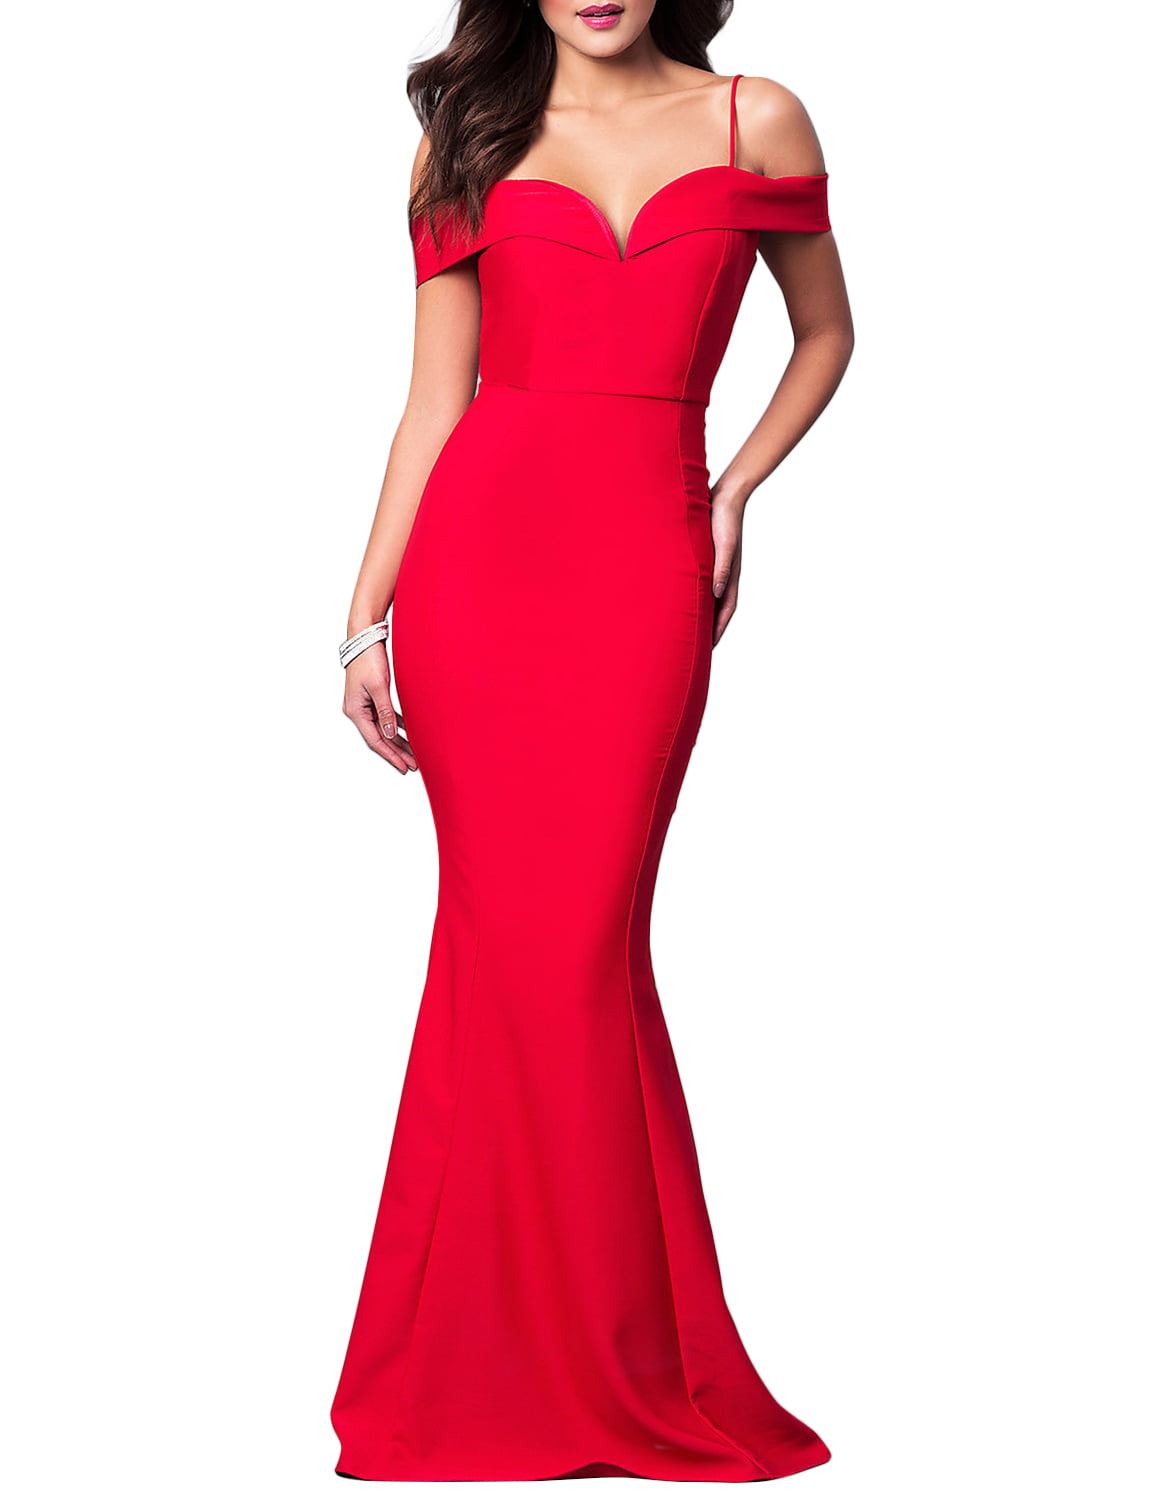 FACE N FACE Womens Long Scoop Neck Strapless Mermaid Evening Dress